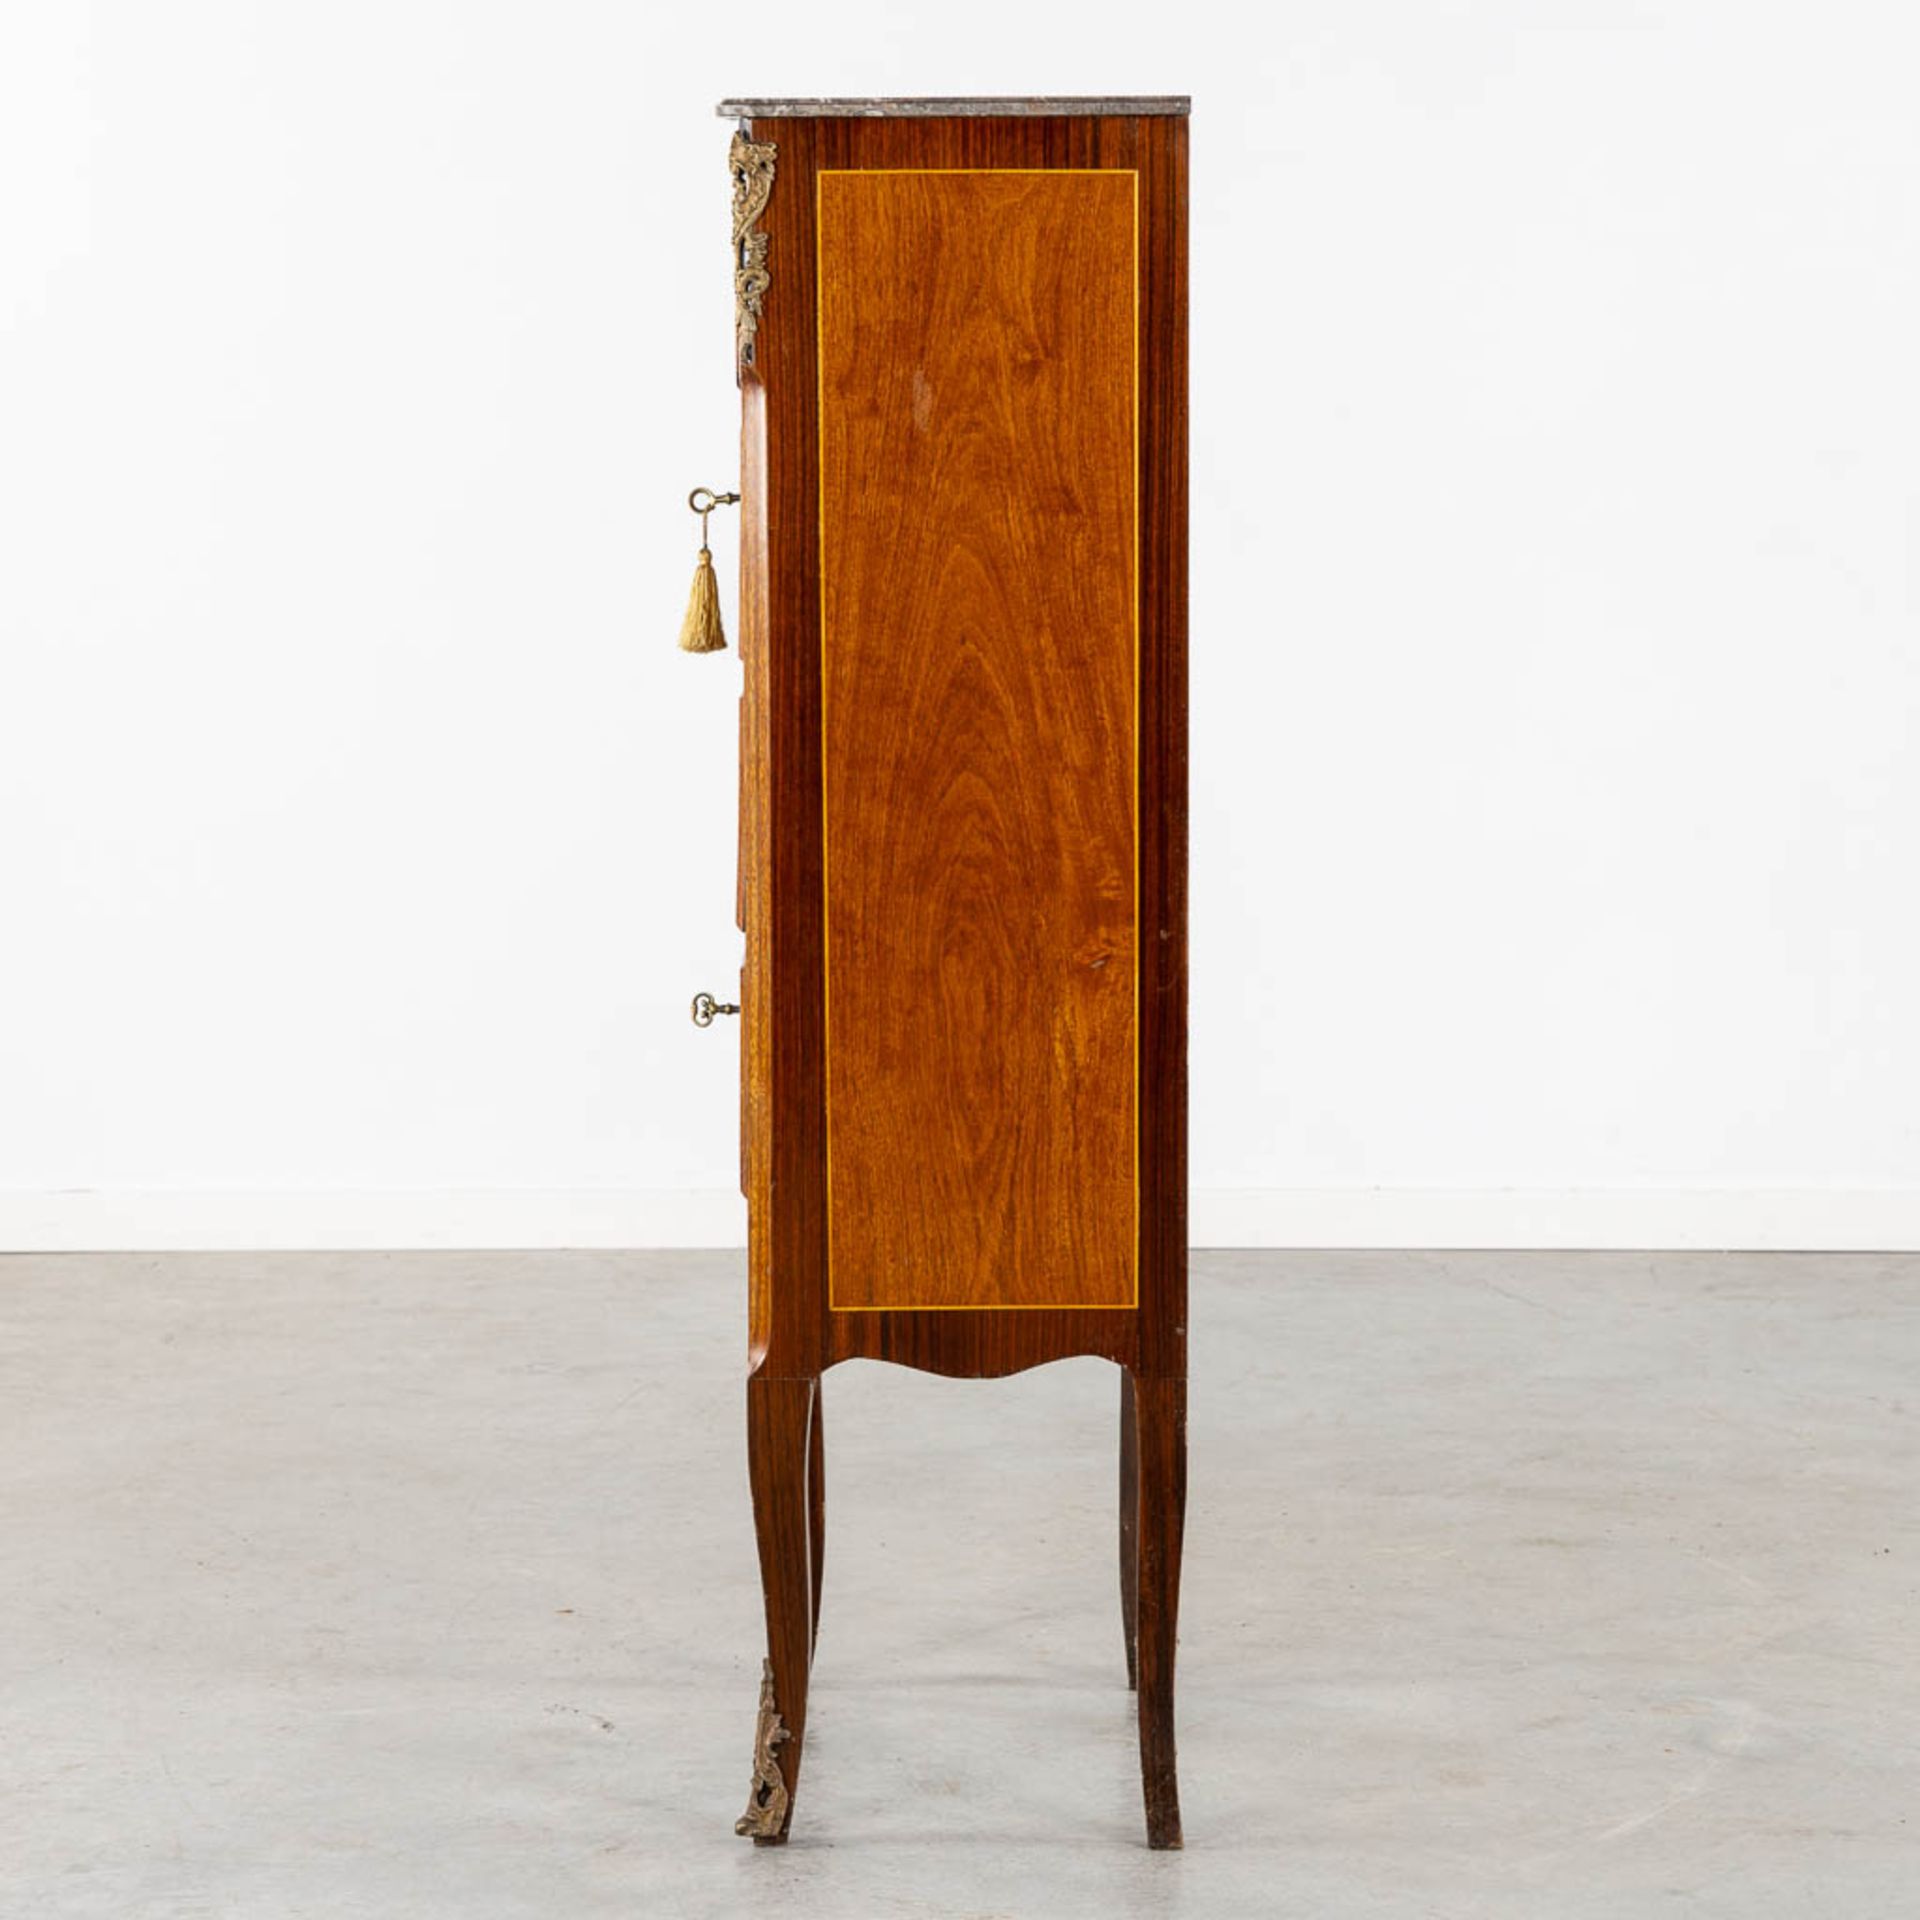 A Secretaire cabinet, Marquetry inlay and mounted with bronze. Circa 1900. (L:34 x W:56 x H:128 cm) - Bild 7 aus 15